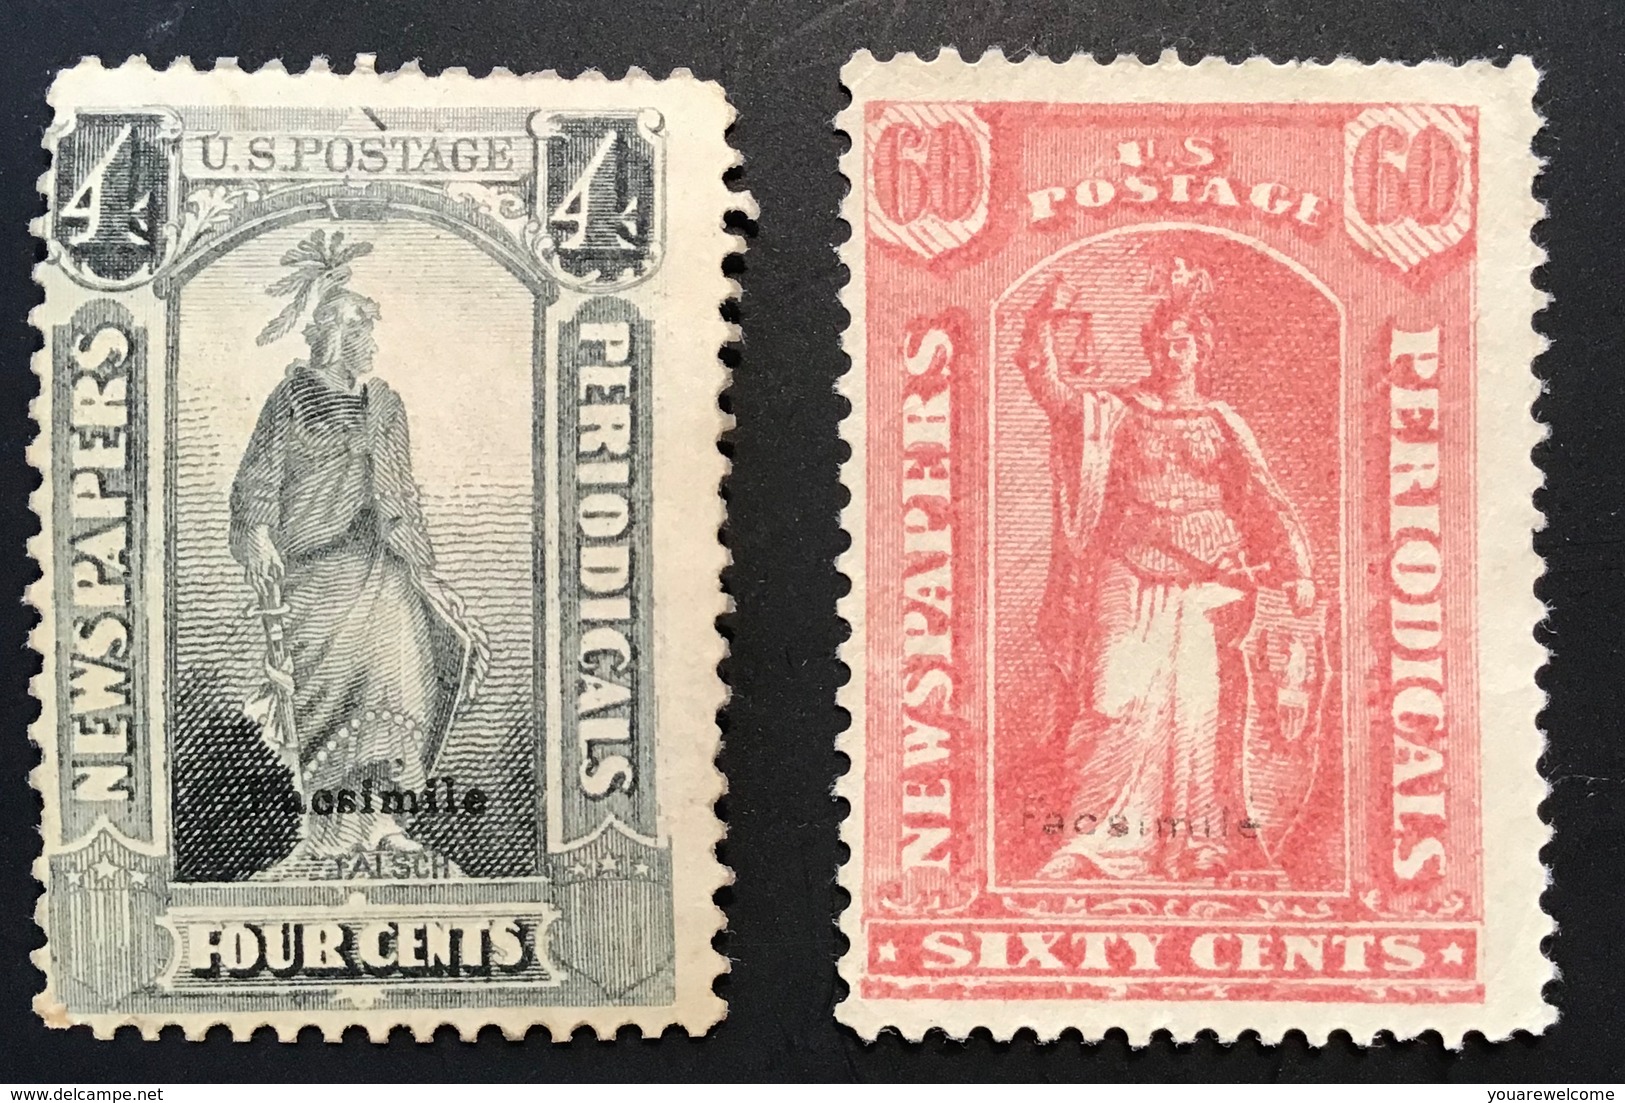 US 1875 Newspaper & Periodical Stamps 2 FORGERIES 19th C.(USA FAUX FALSCH FORGERY Timbres Pour Journaux - Giornali & Periodici